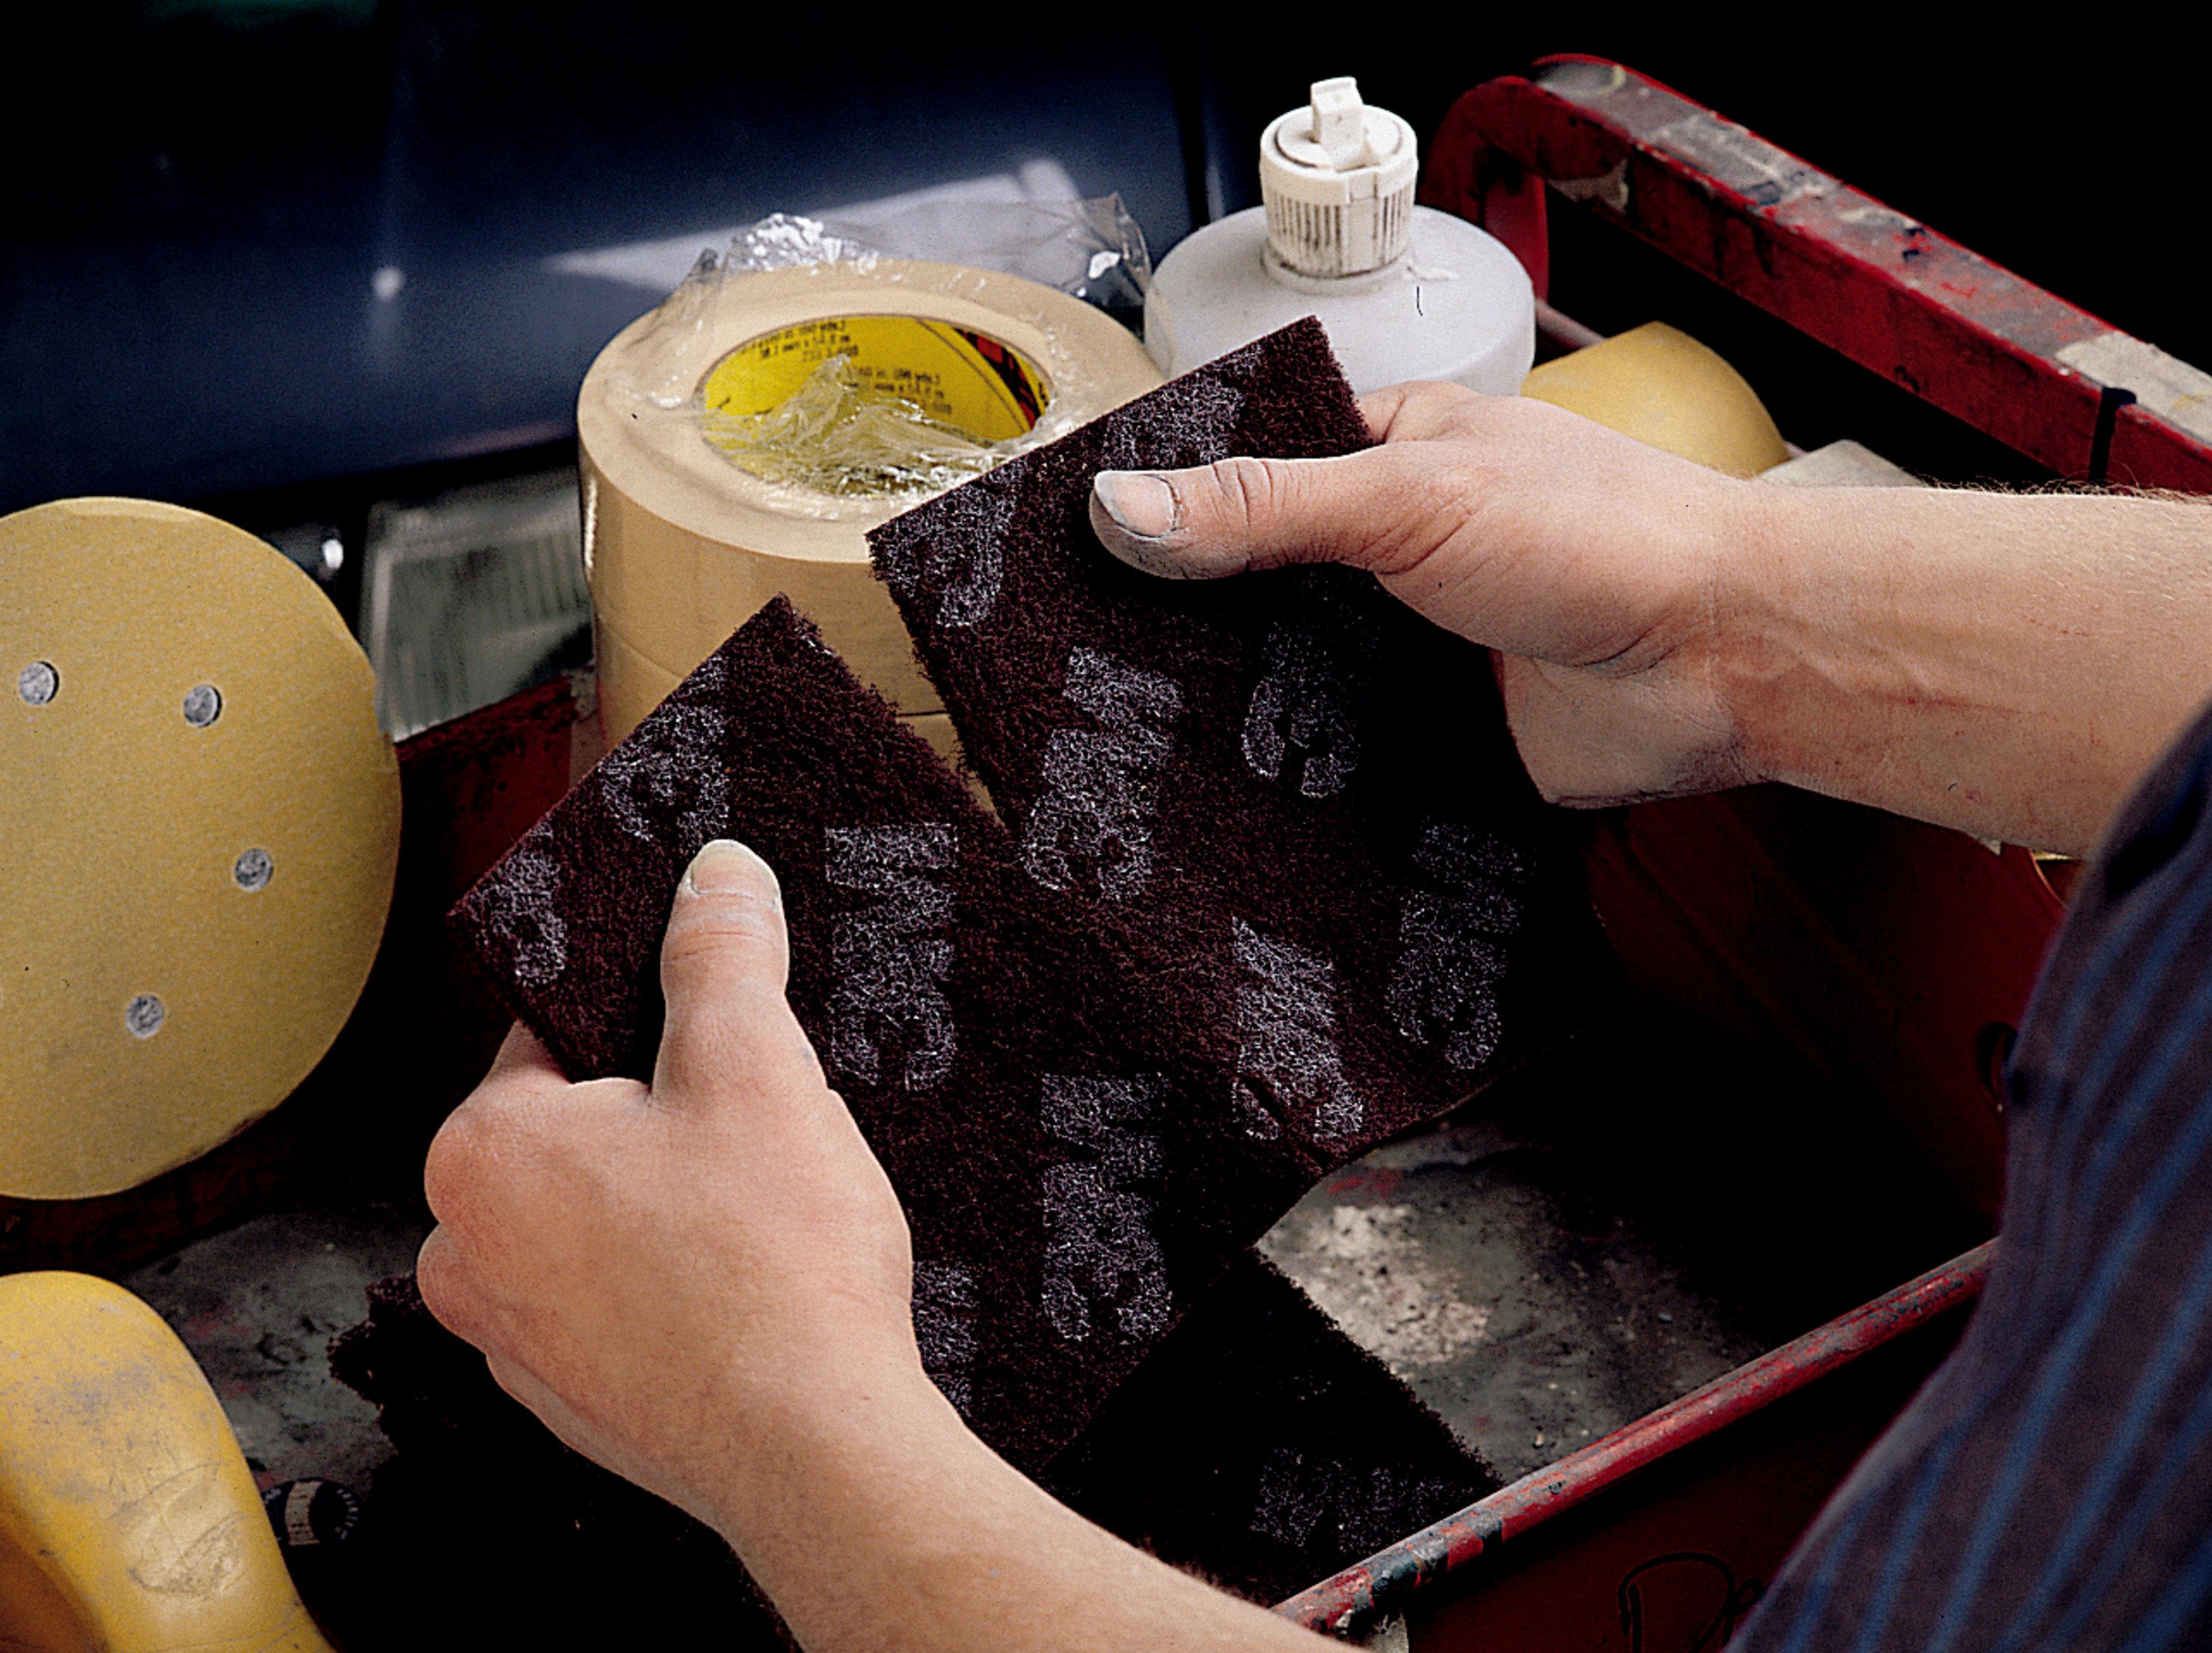 From aesthetic finishing to weld blending, deburring, and more, Scotch-Brite abrasives work fast and deliver consistent results, part after part.